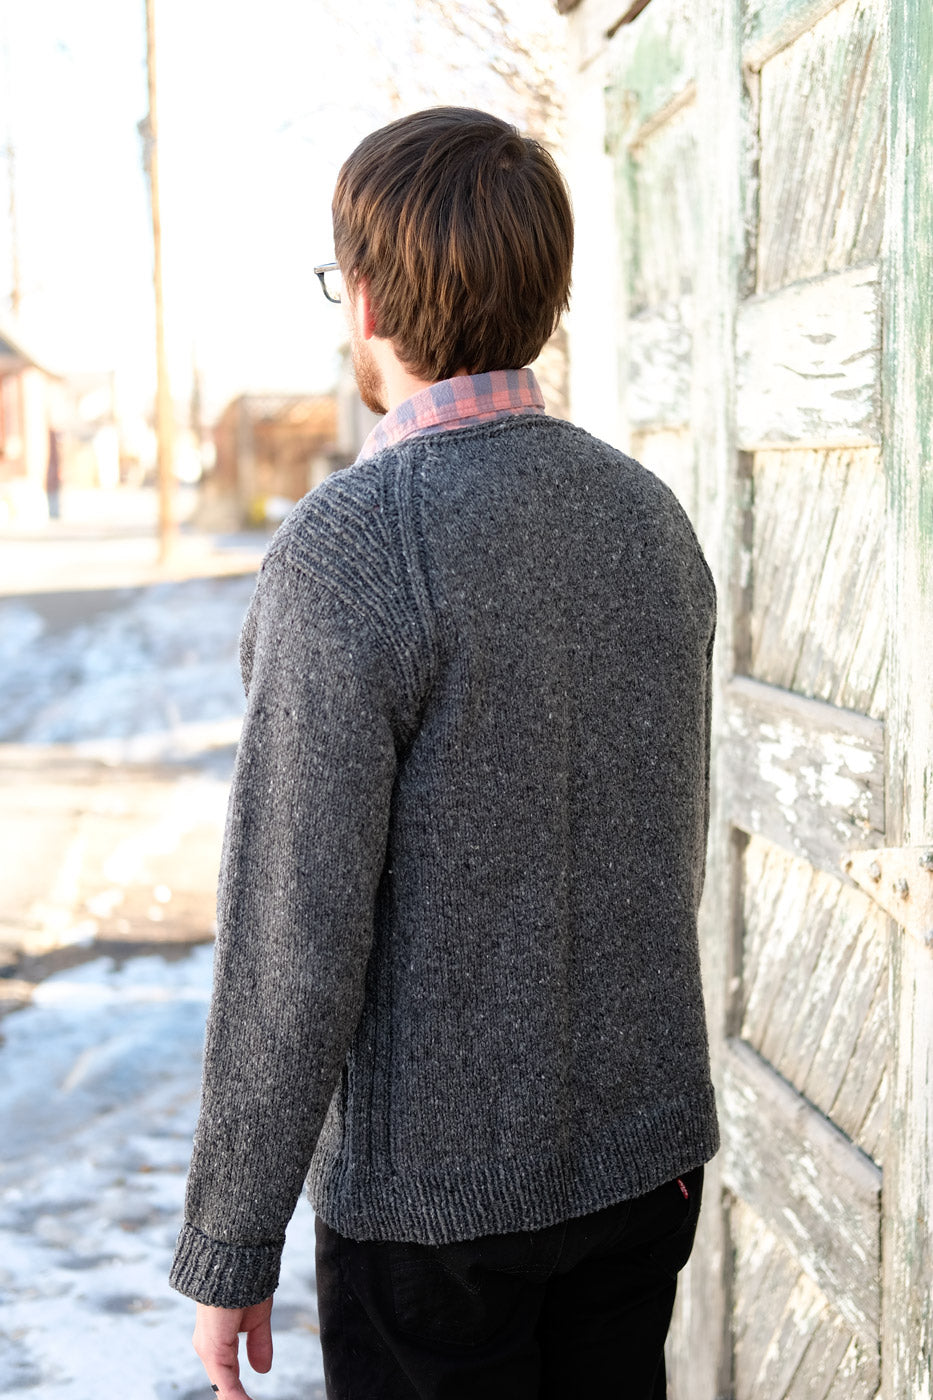 Rift Sweater in Brooklyn Tweed Shelter from behind